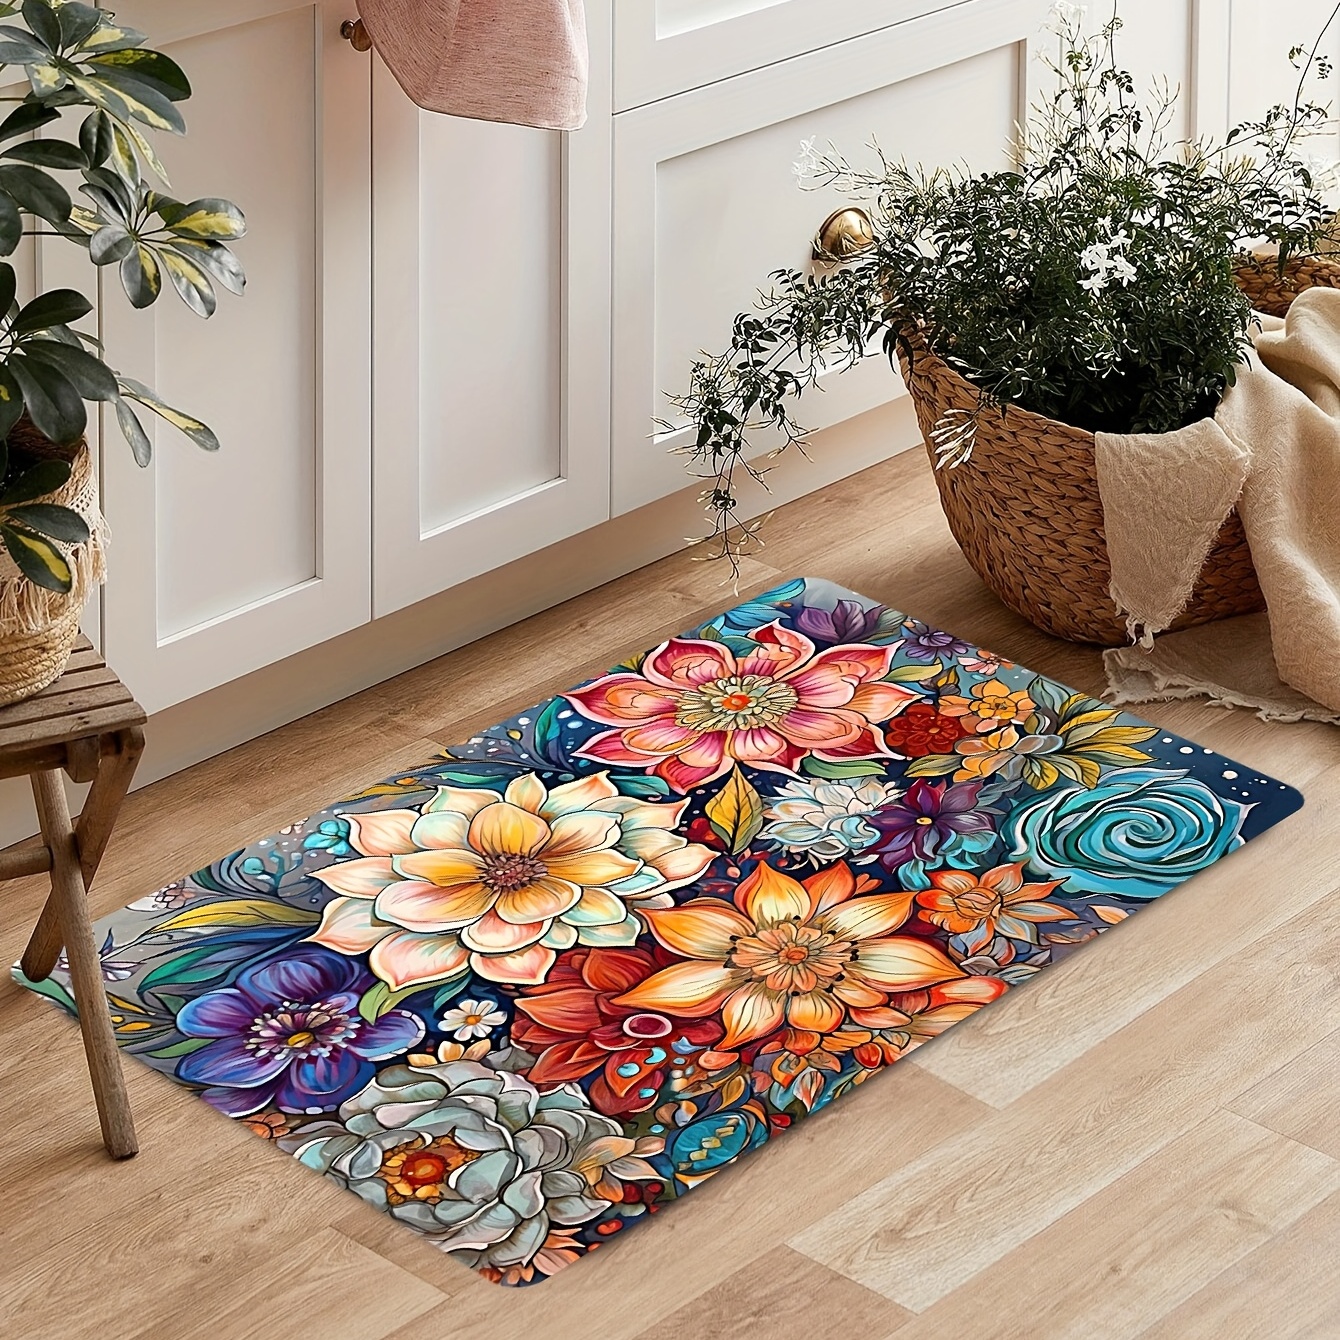 Cuttable Area Rug,Oil Painting Art Non-Slip Bathroom Floor Mat Boho  Abstract Distressed Non-Shedding Living Room Bedroom Dining Home Entrance  Kitchen